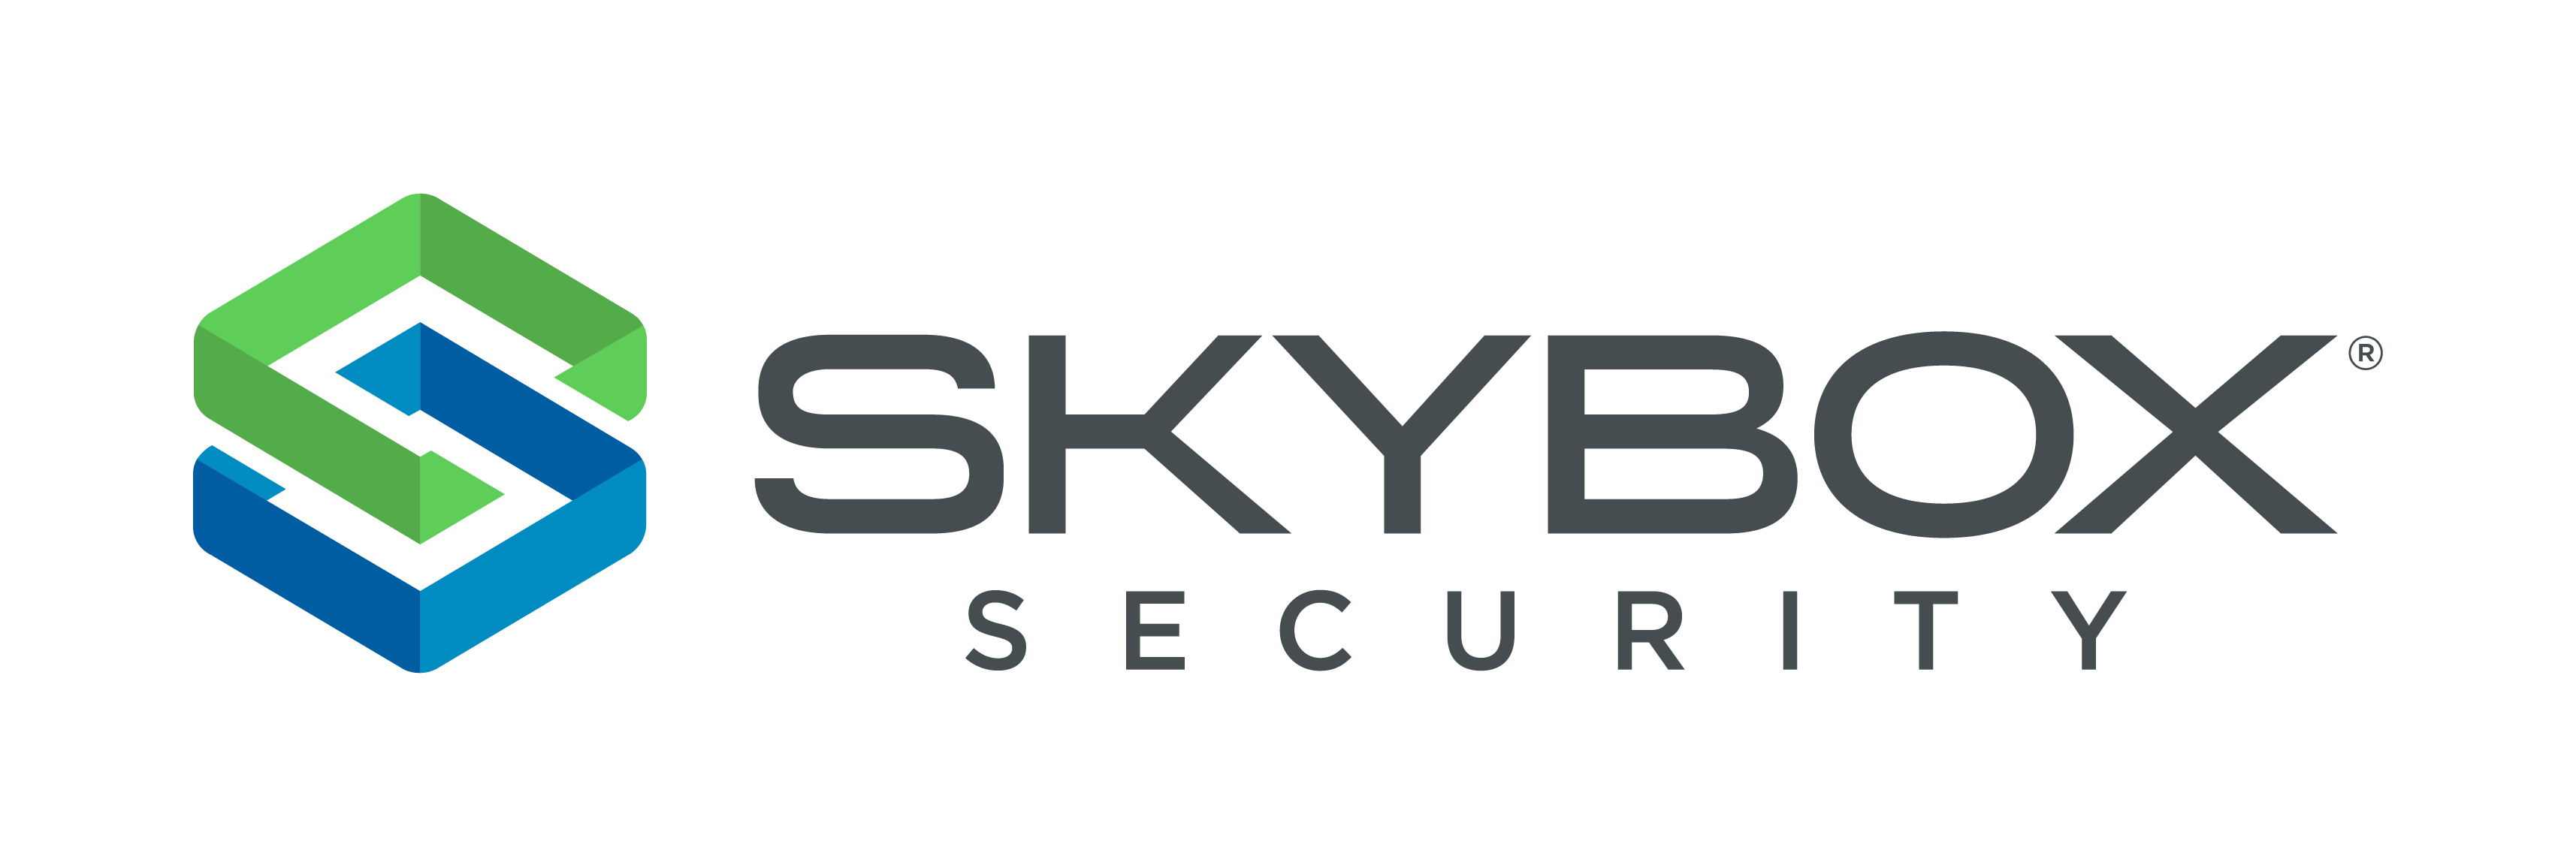 Skybox Security Anno